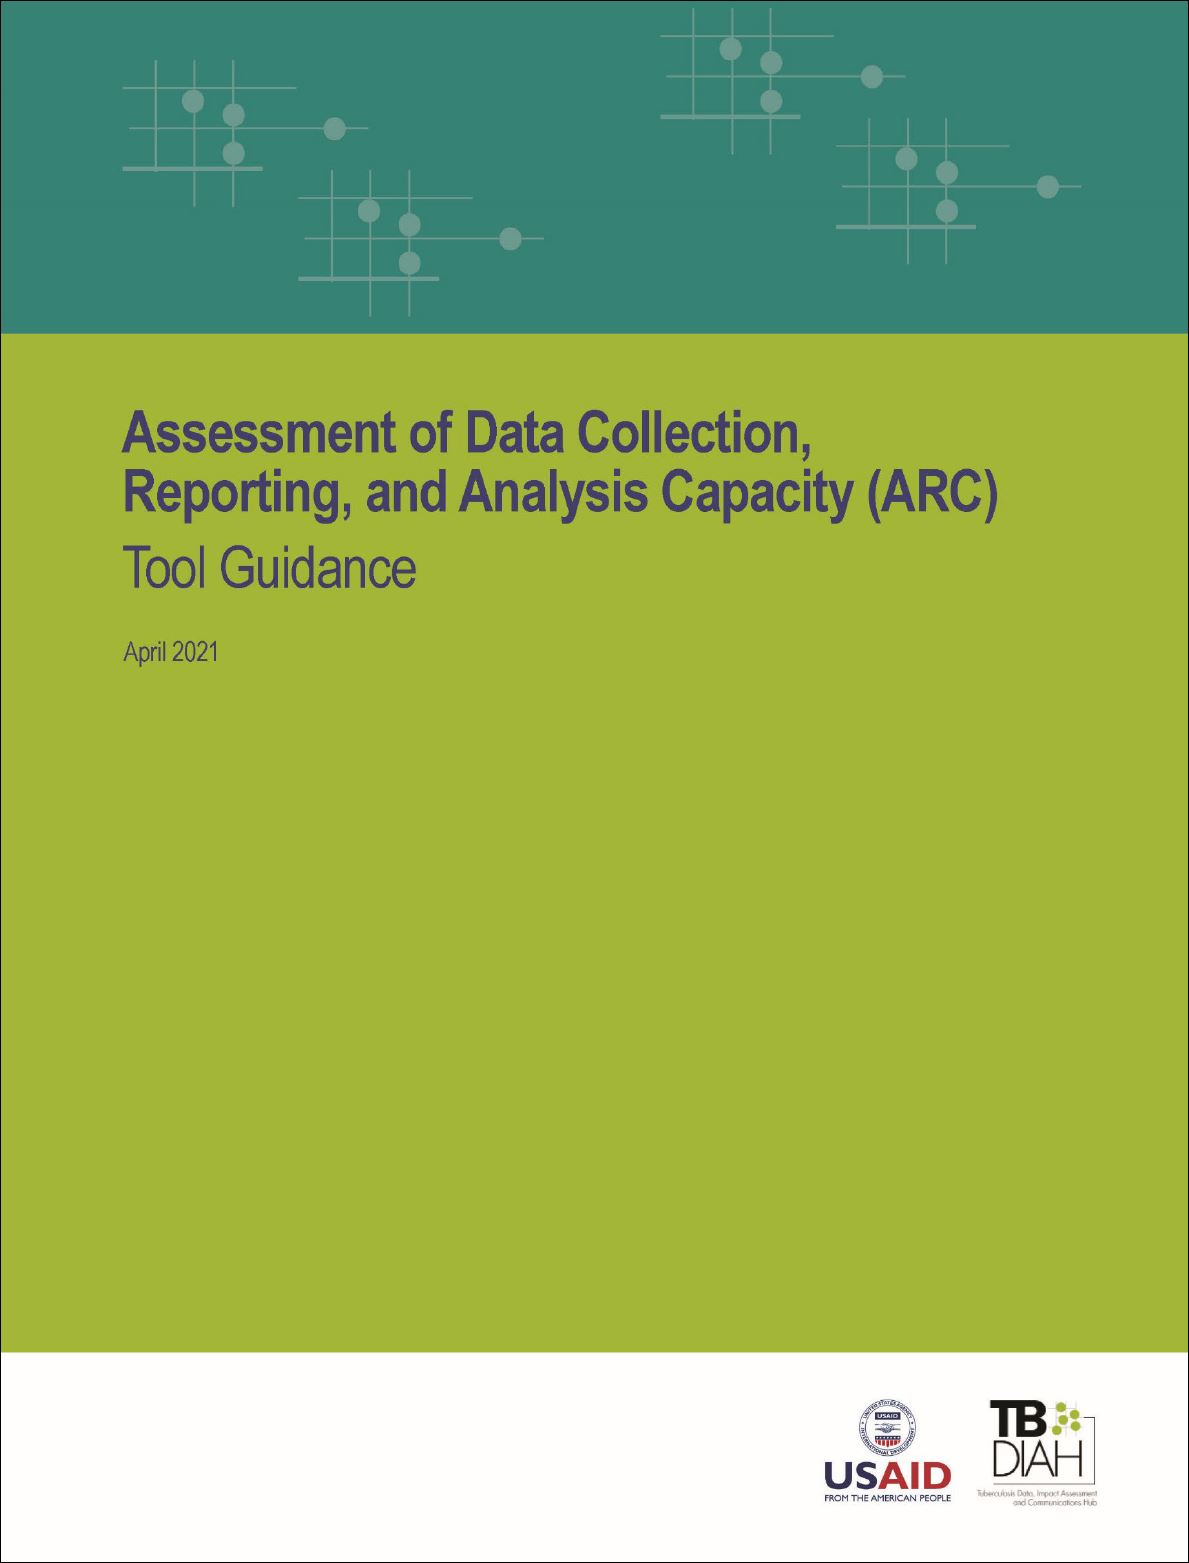 Assessment of Data Collection, Reporting, and Analysis Capacity (ARC) Tool Guidance